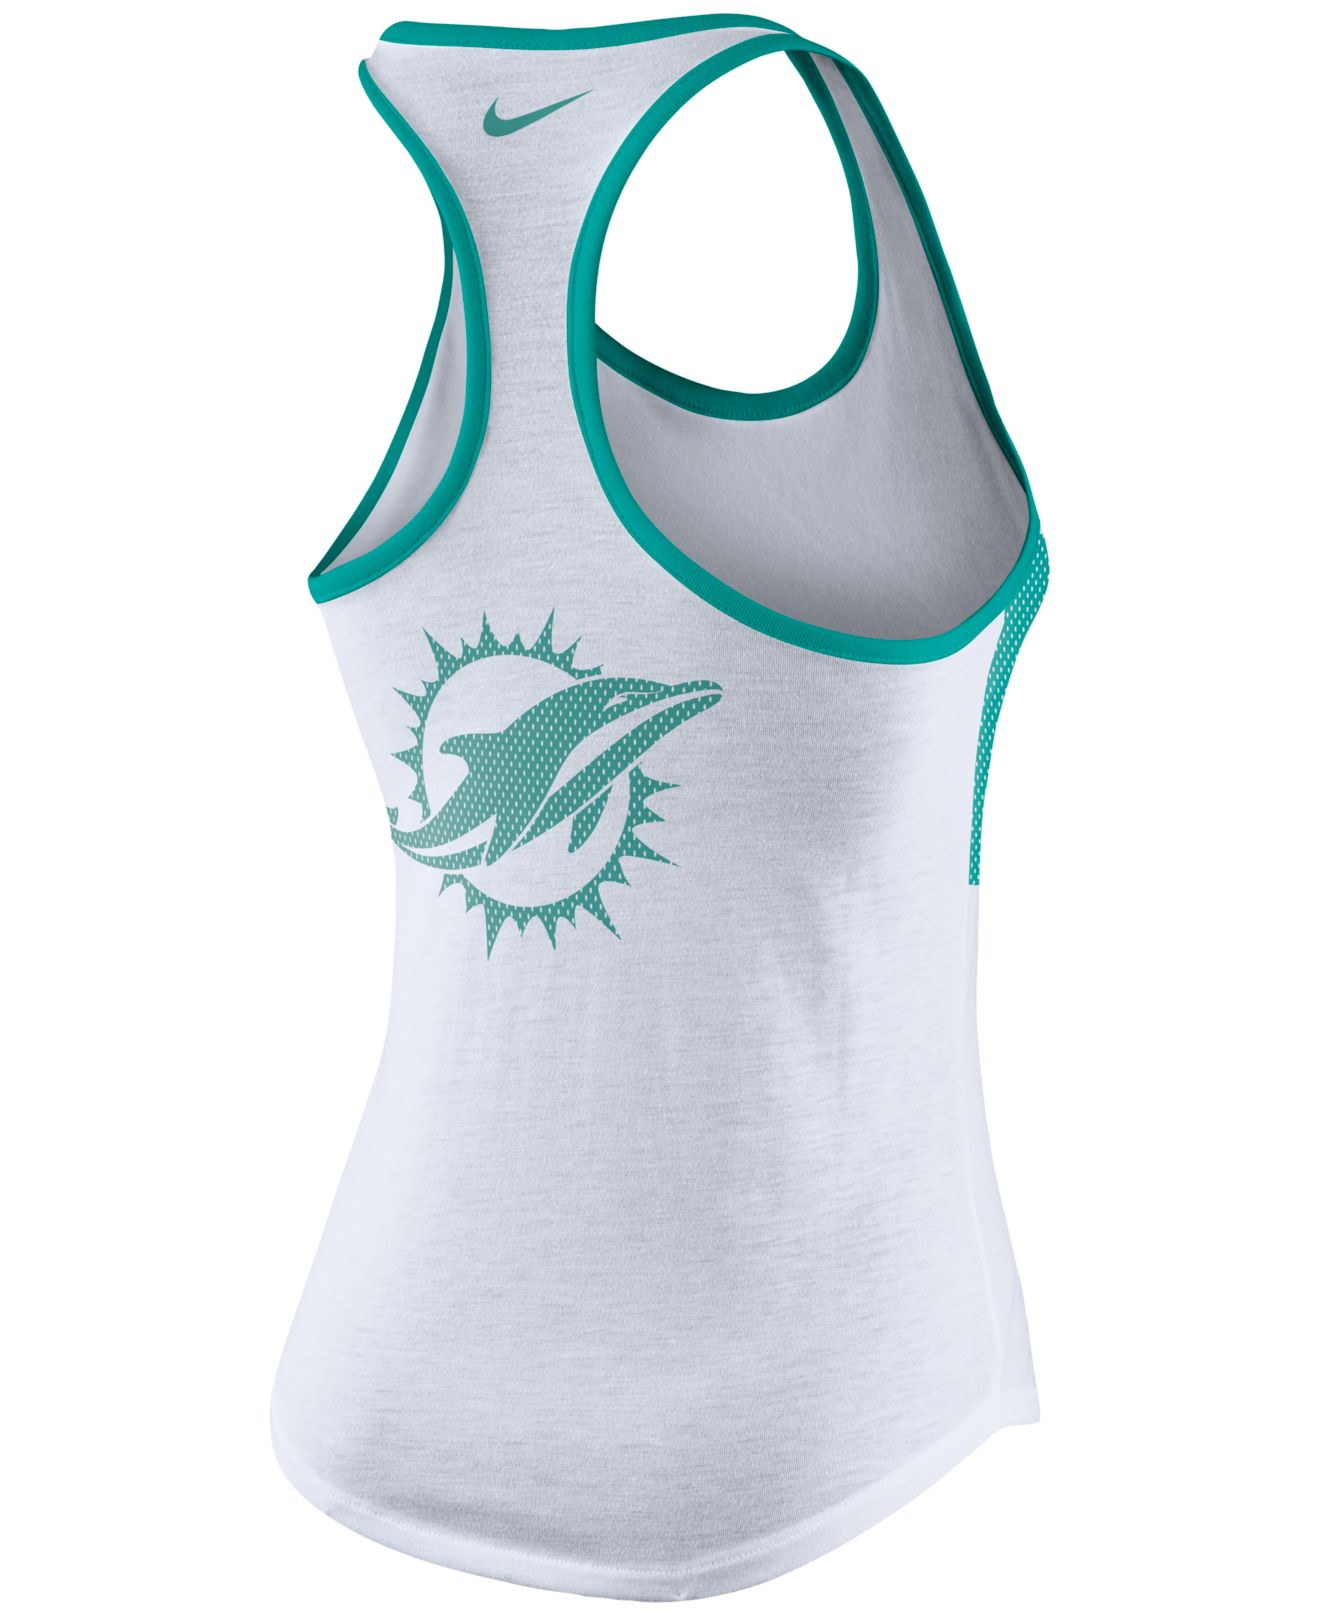 miami dolphins womens crop top